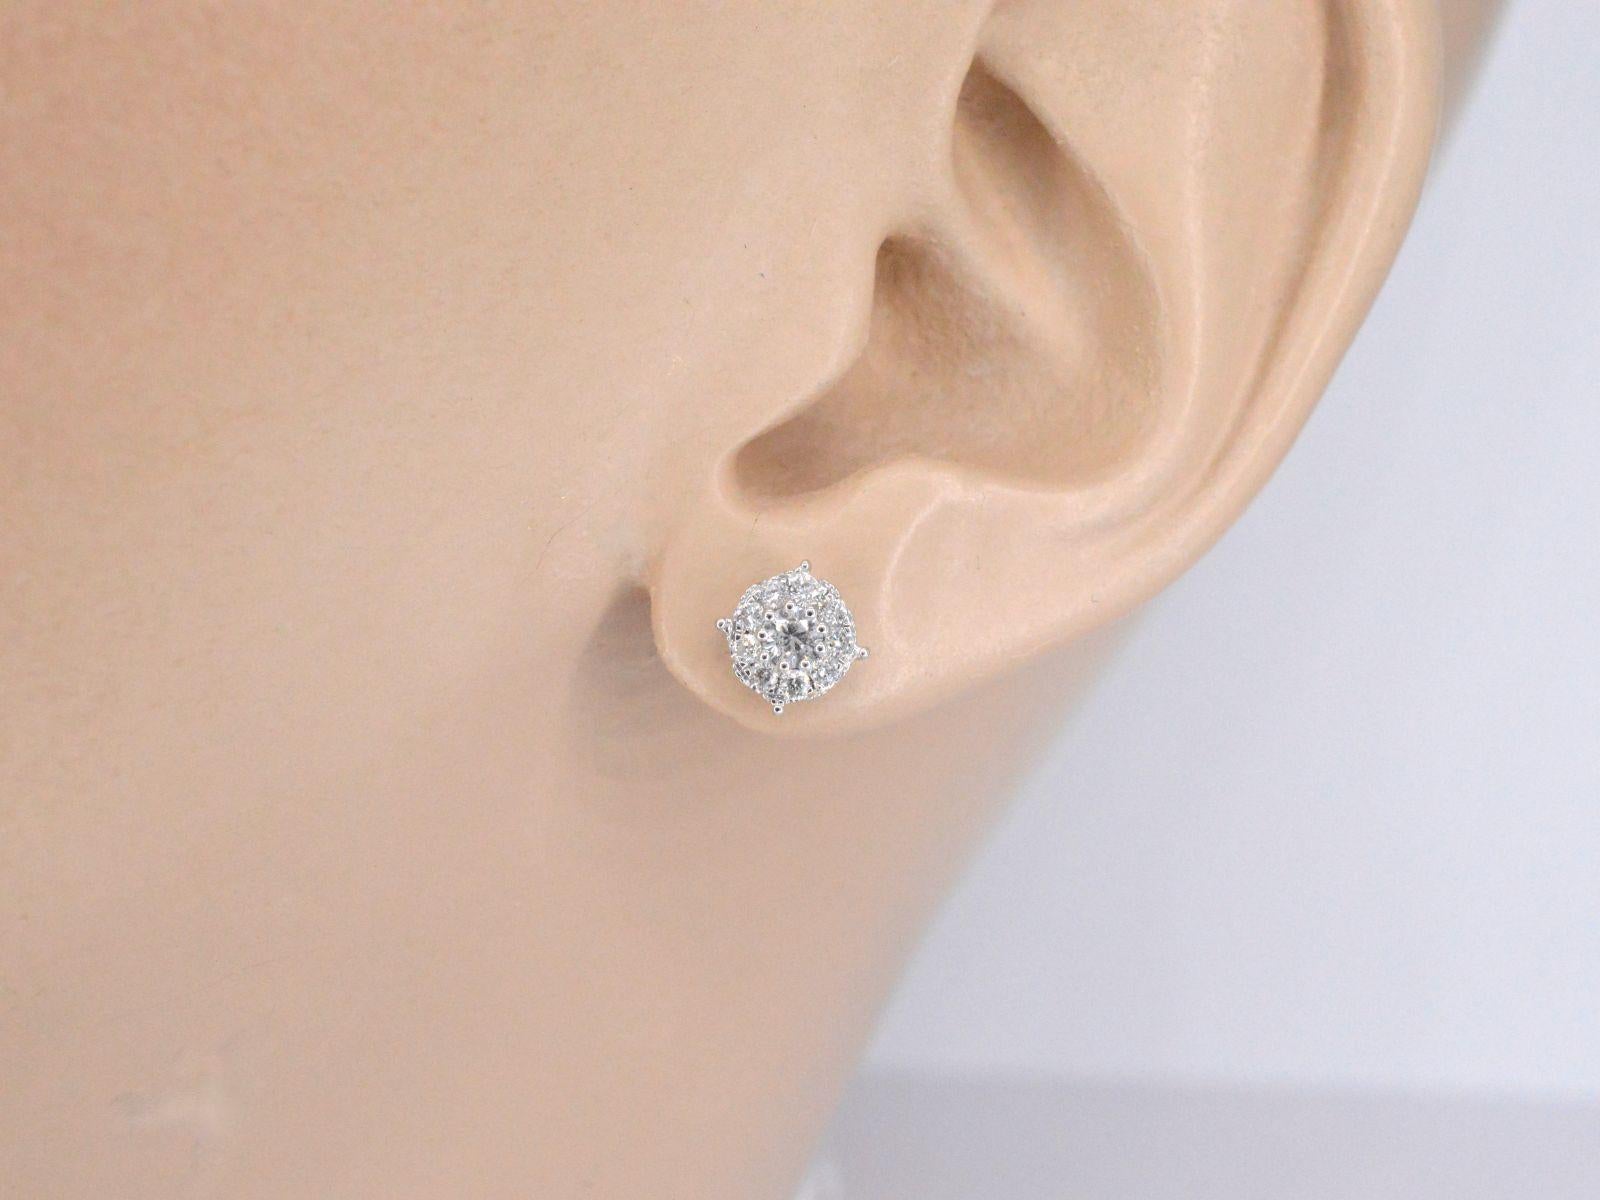 These exquisite white gold earrings are composed of brilliant cut diamonds set in a classic round setting, creating a stunning and timeless design. The diamonds are expertly placed in a four-prong style, allowing for optimal light exposure and